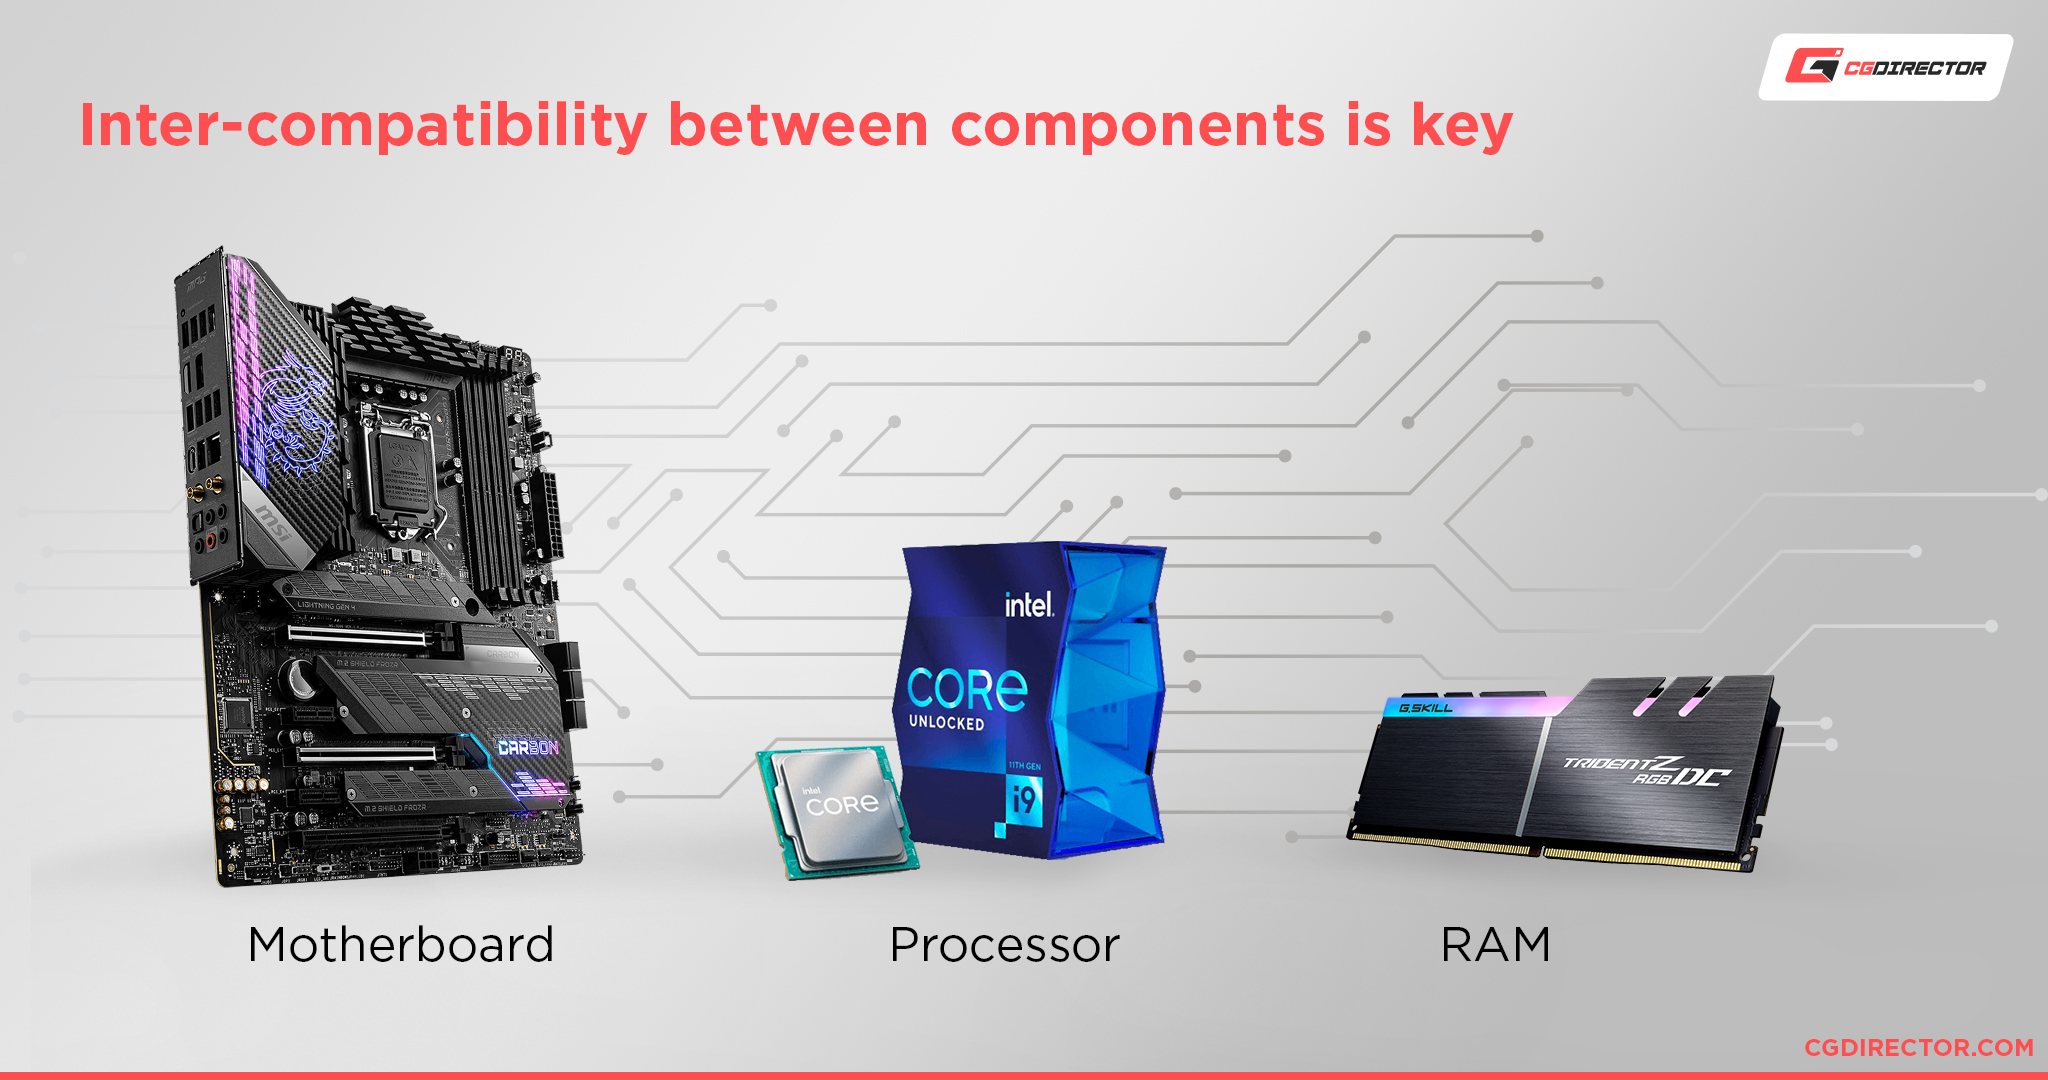 Intercompatibility between components is key